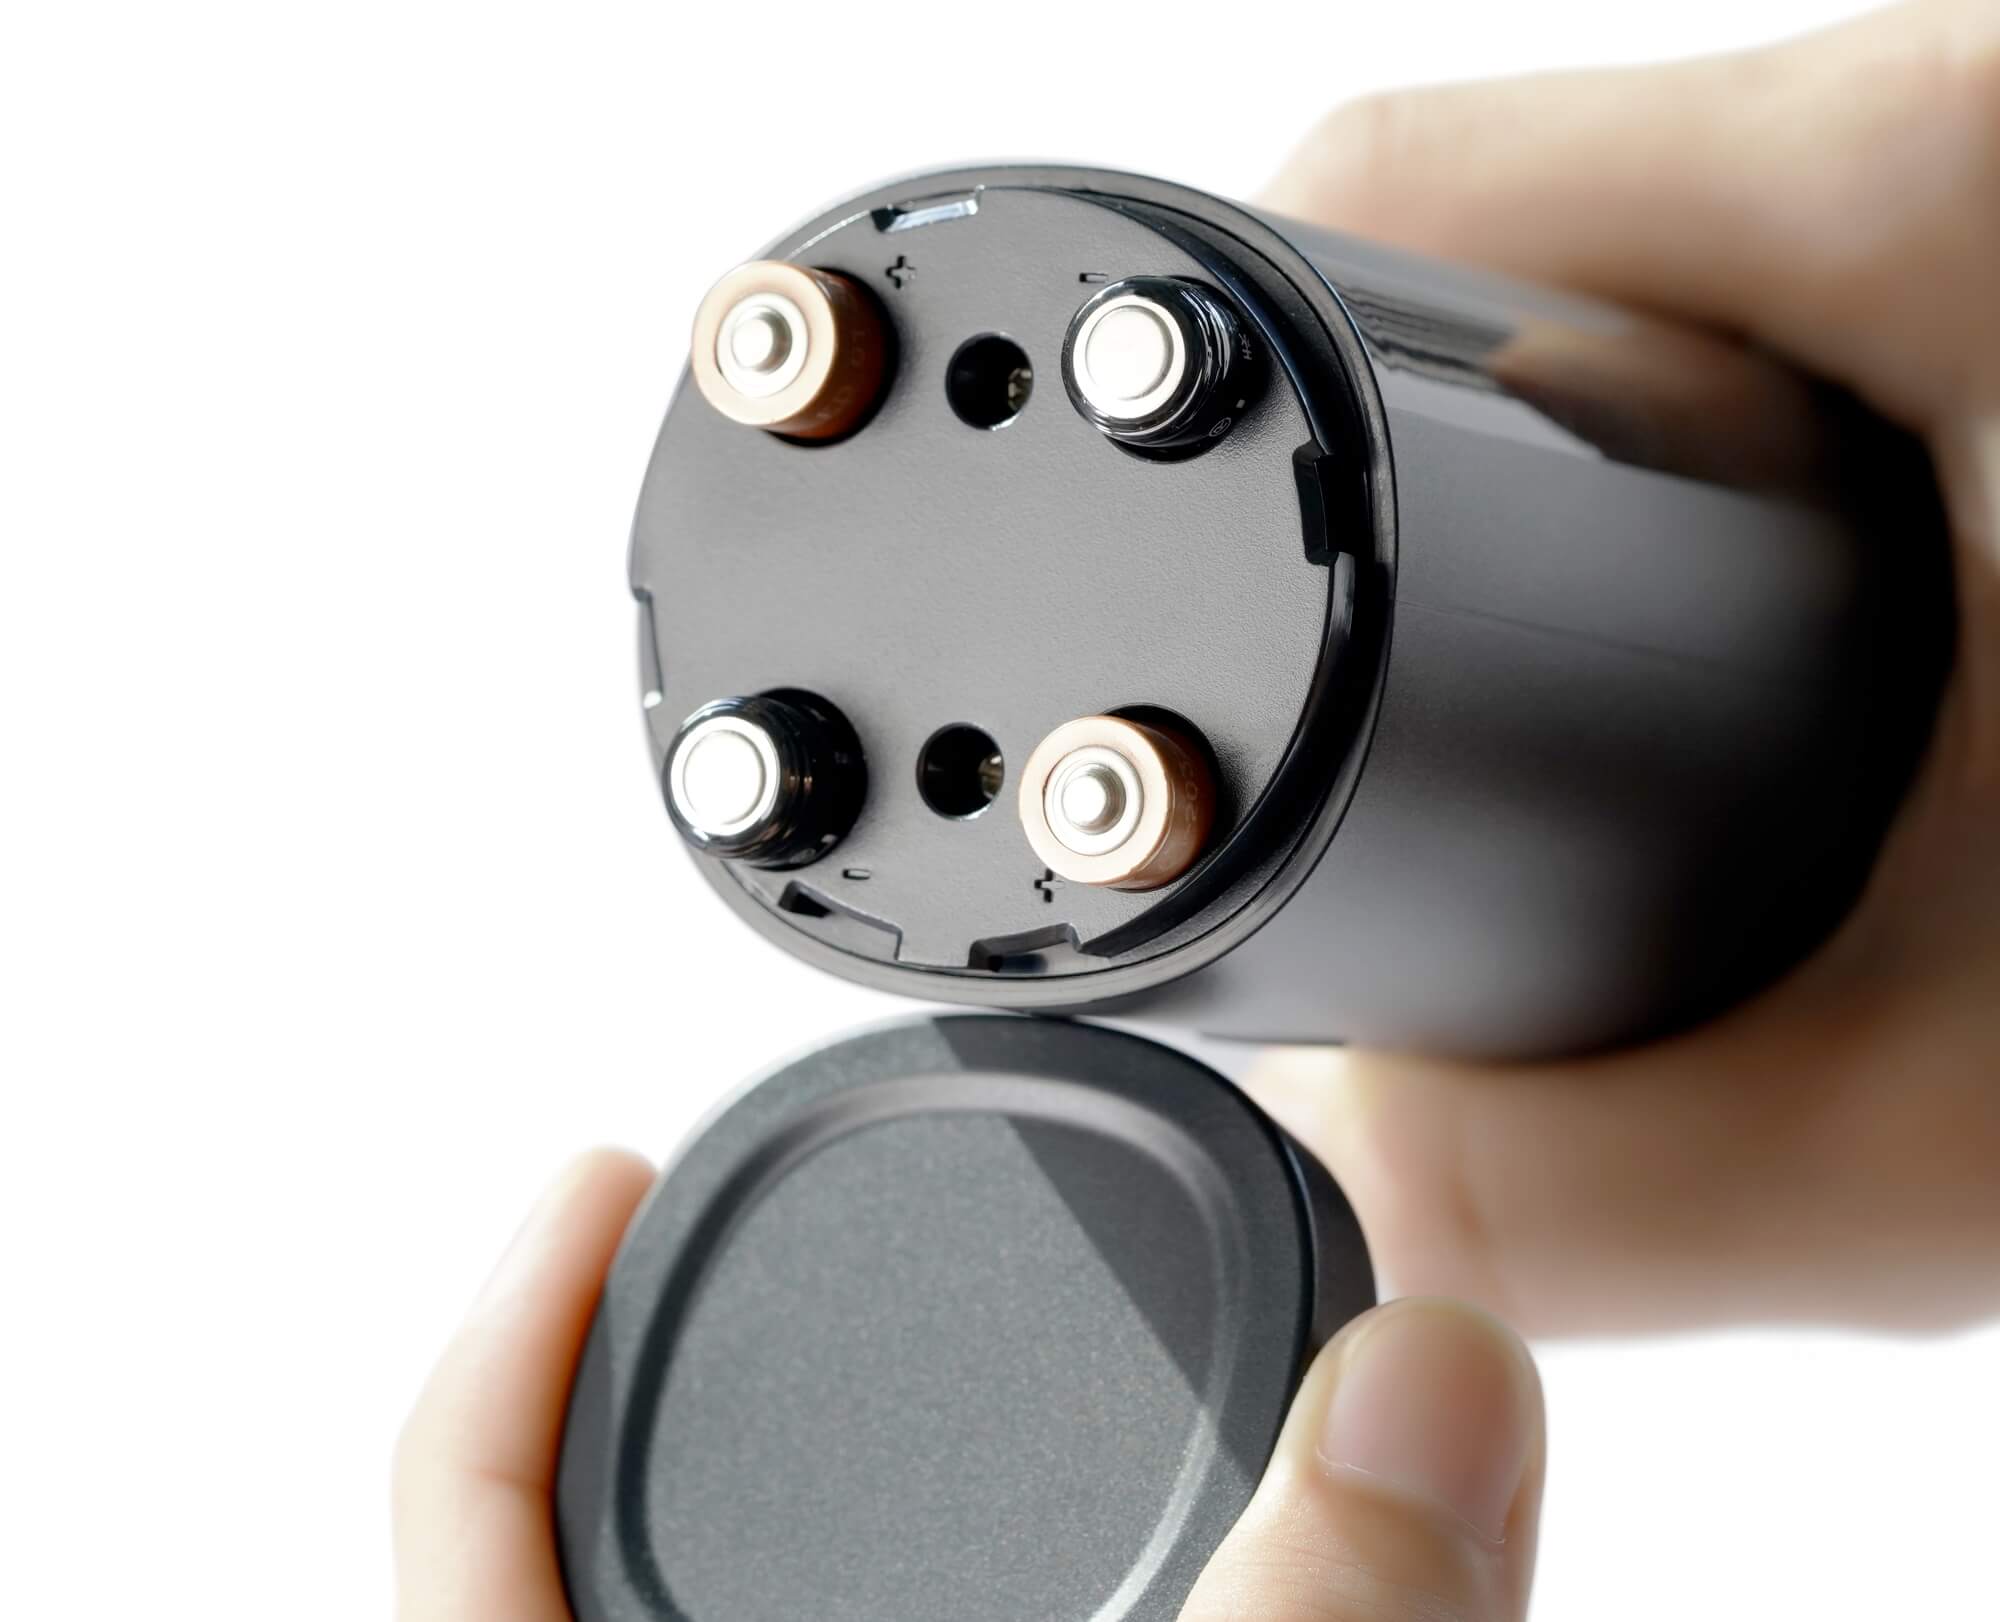 Closely view Battery Compartment of Benchusch Modern Electric Gravity Pepper Grinder on the white background